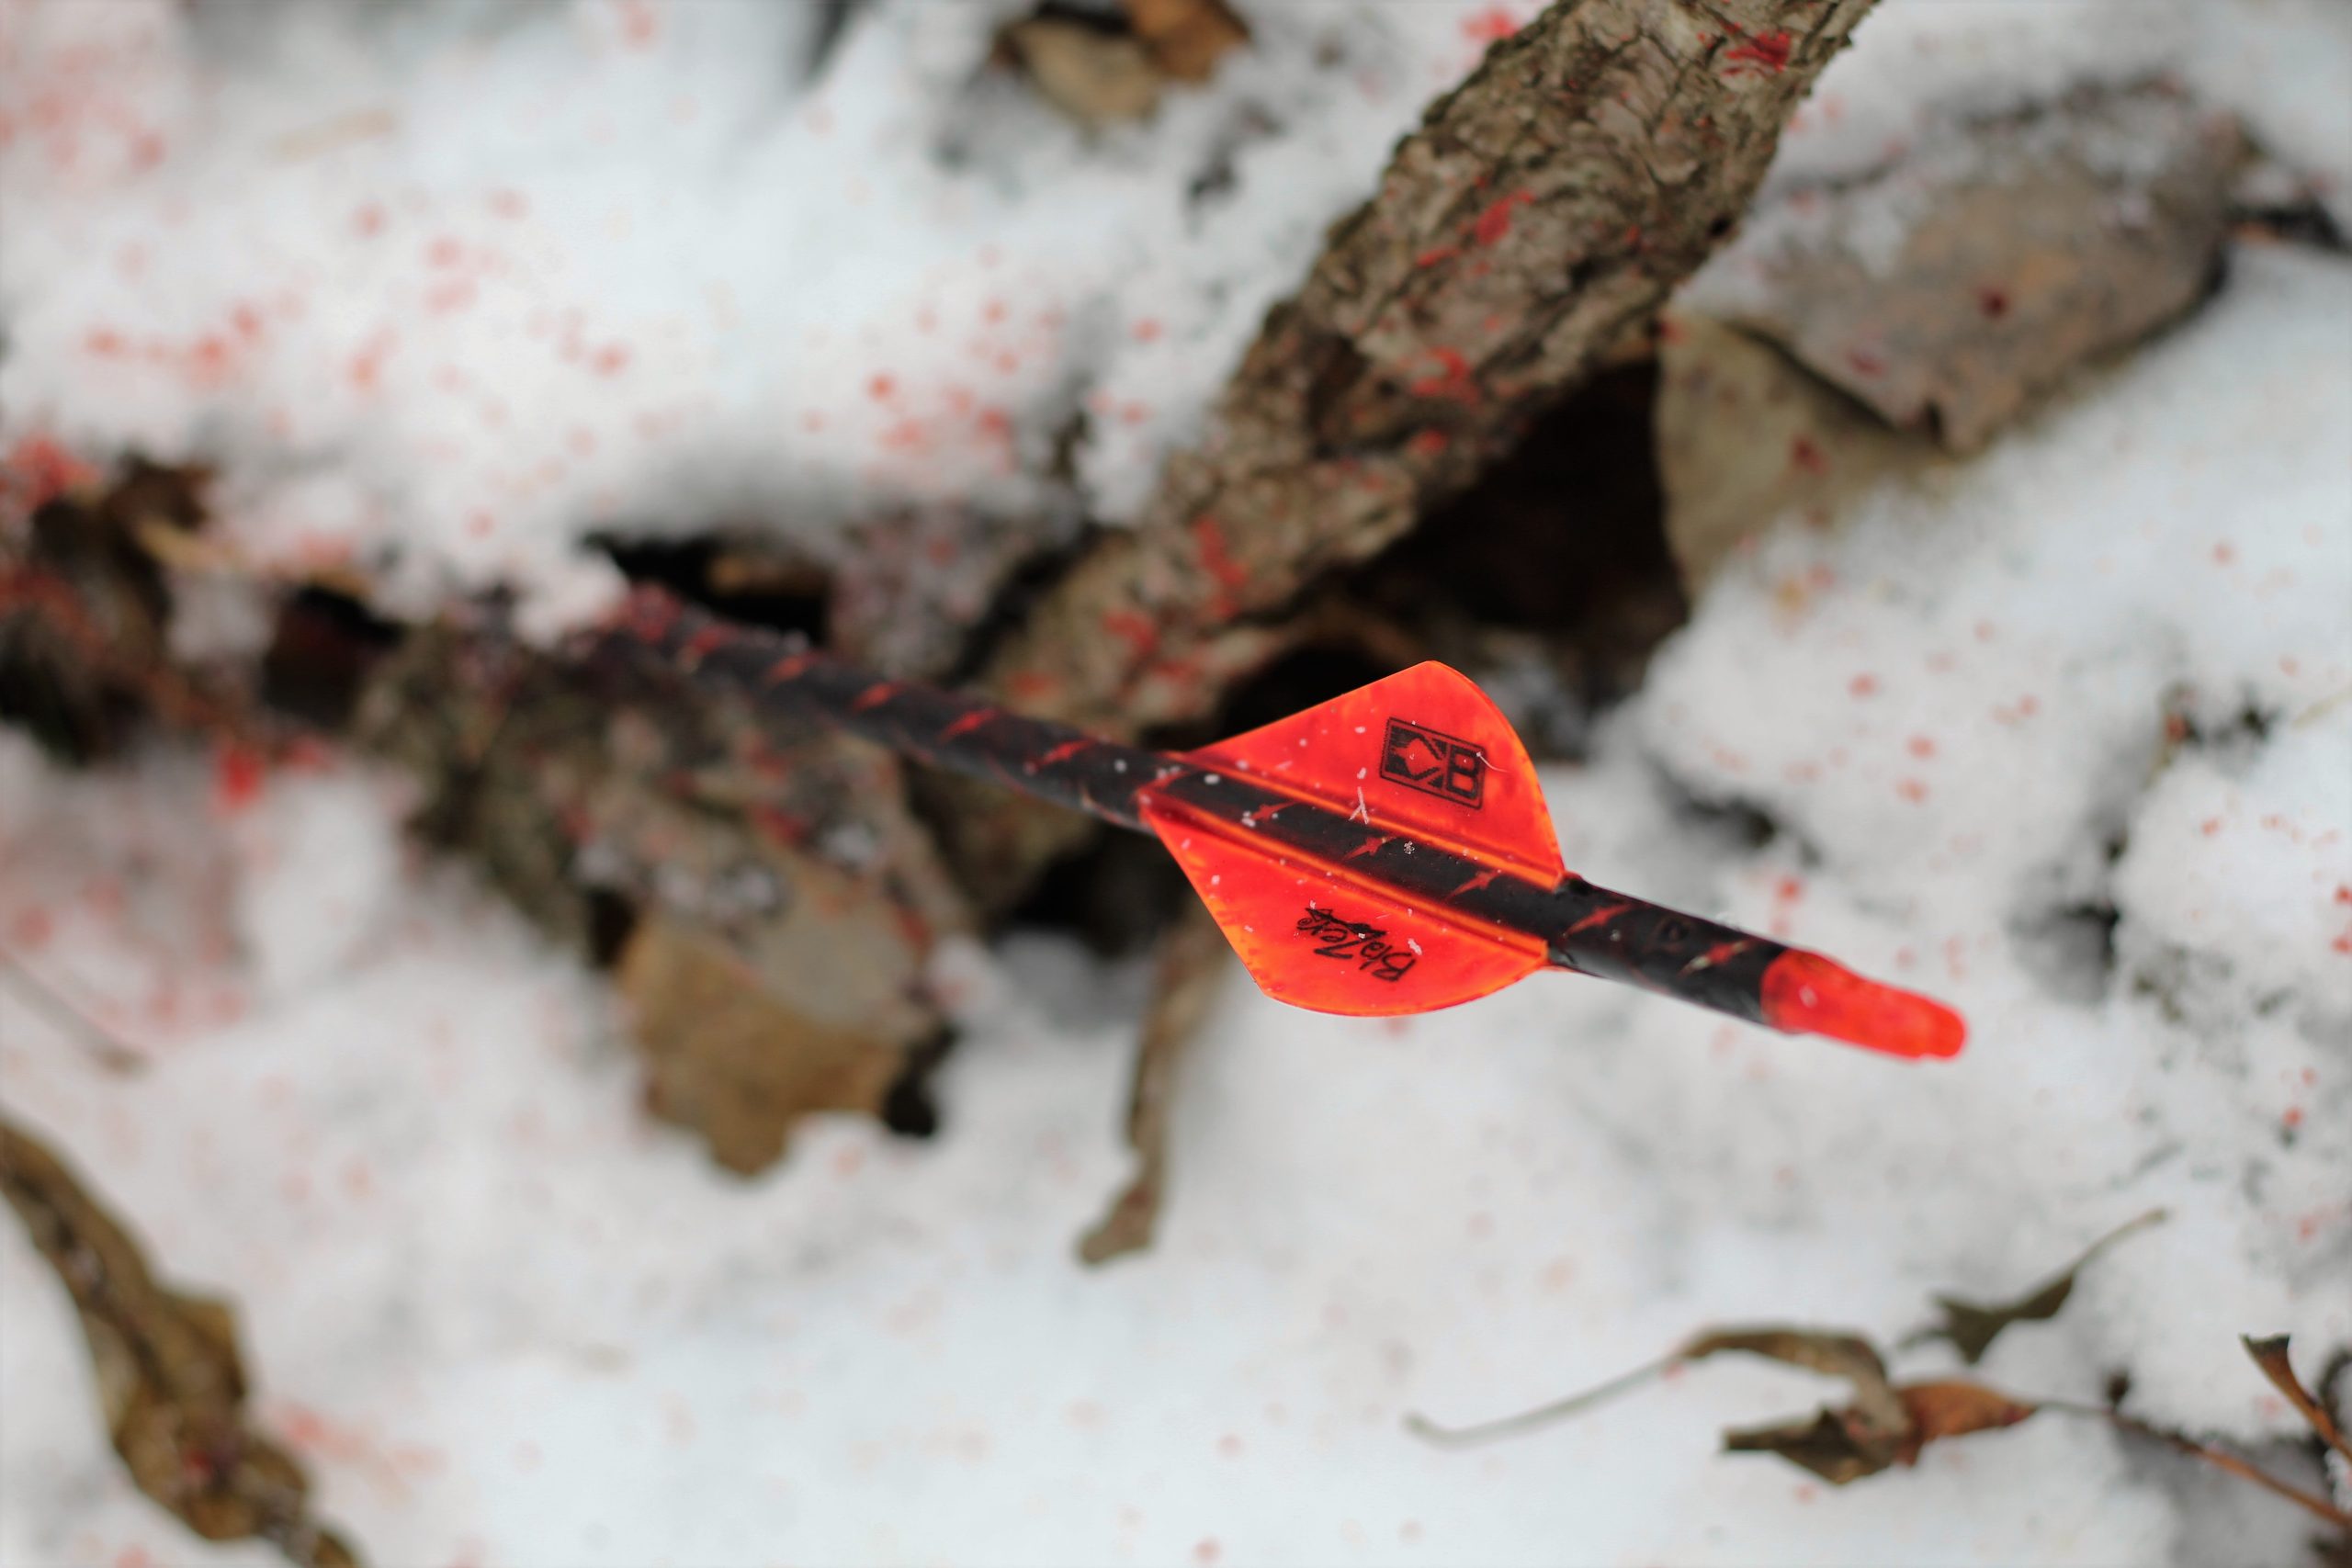 Arrow shaft protruding from blood spattered snow.